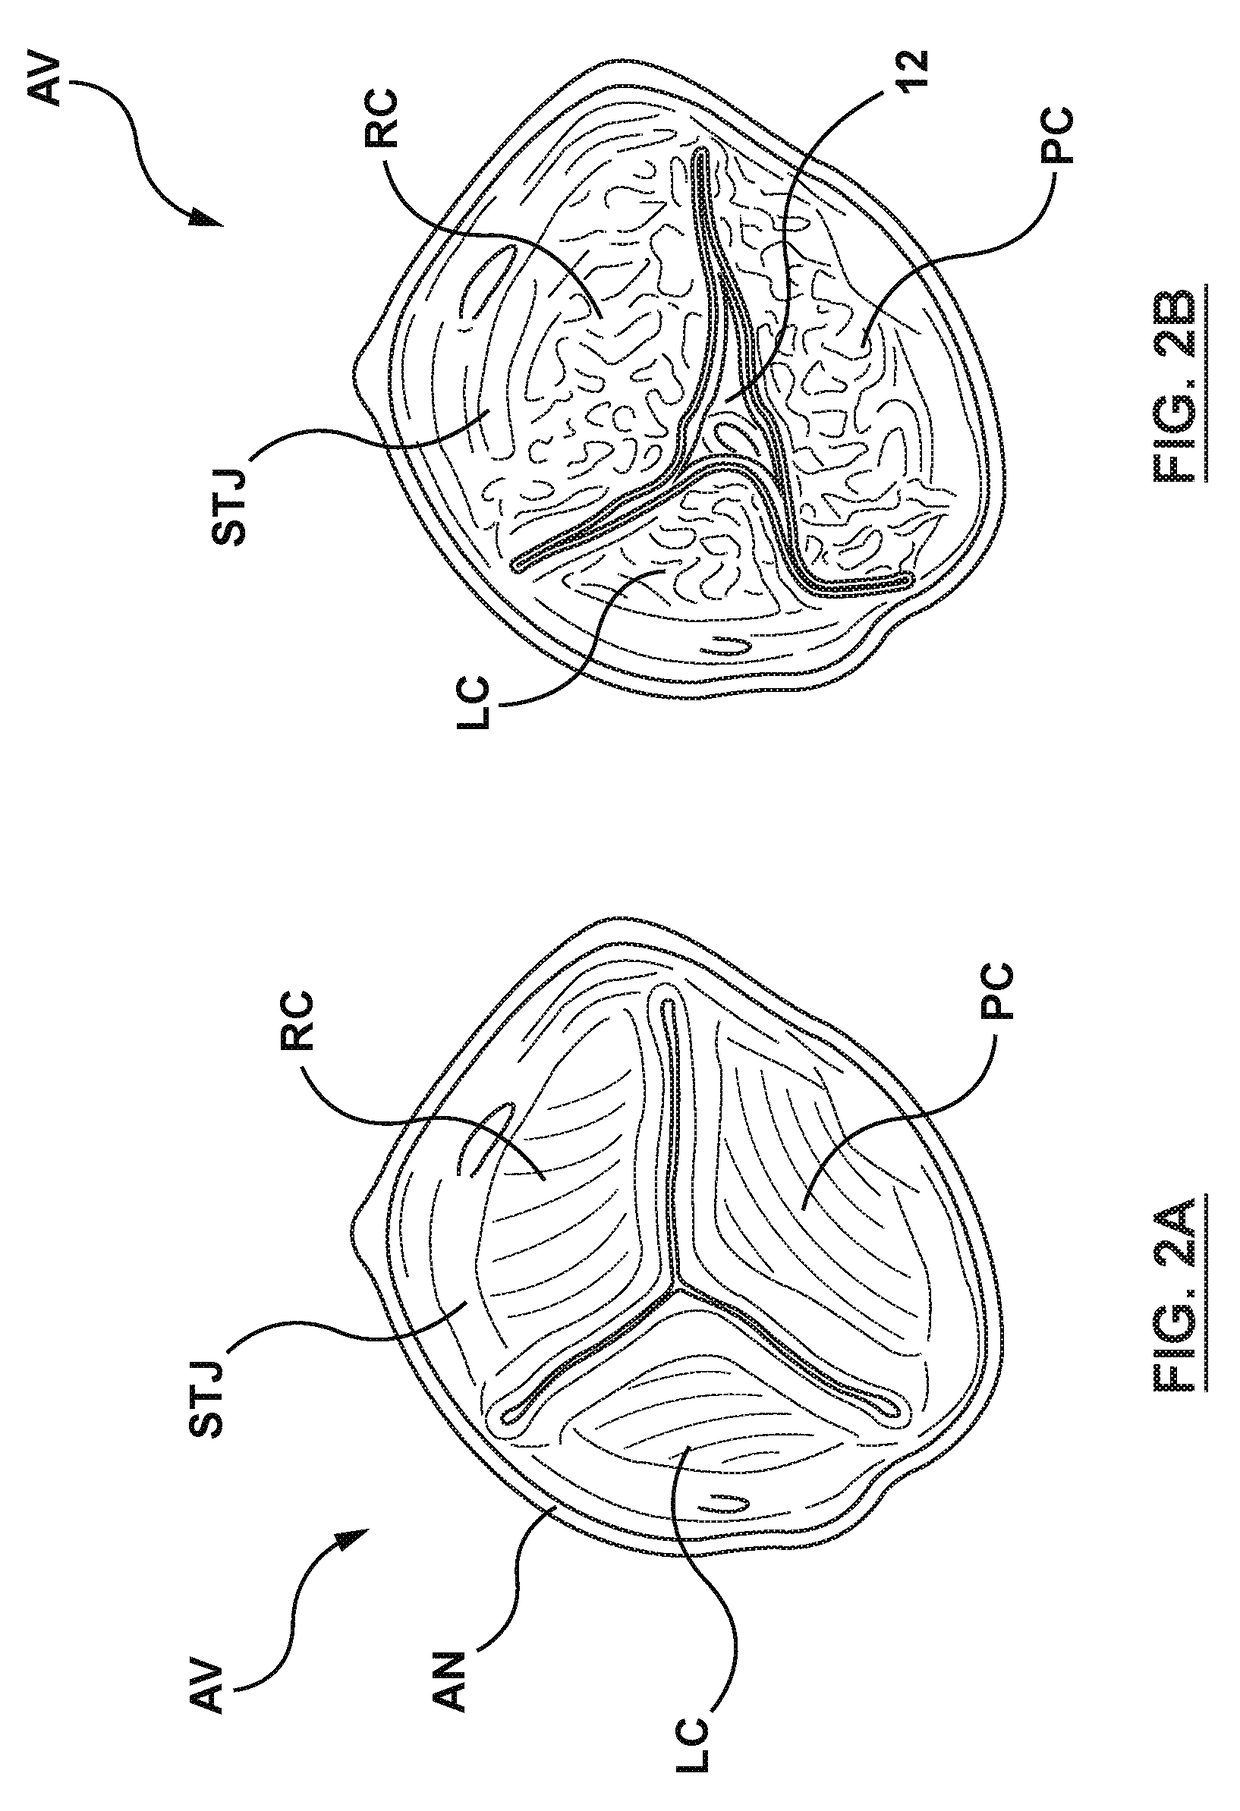 Transcatheter guidewire delivery systems, catheter assemblies for guidewire delivery, and methods for percutaneous guidewire delivery across heart valves